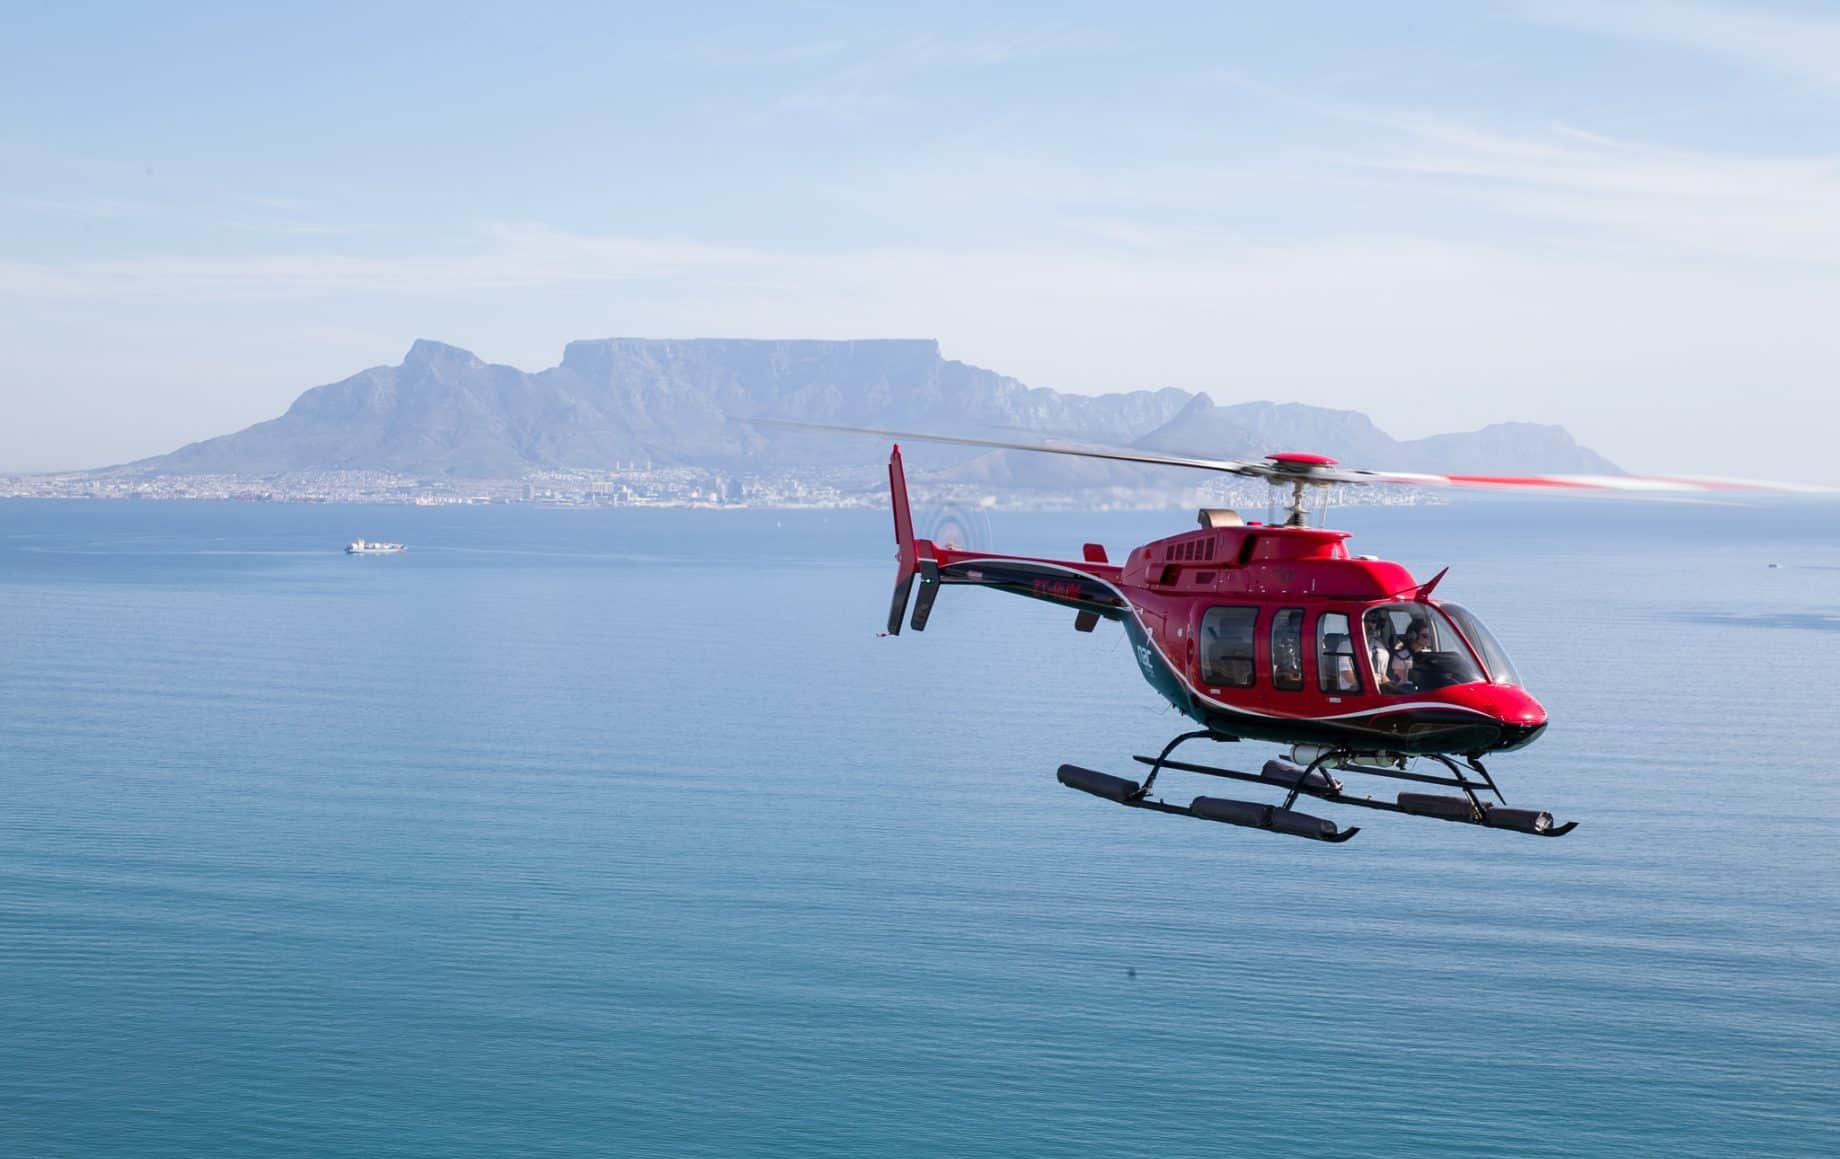 A helicopter over the ocean by Cape town